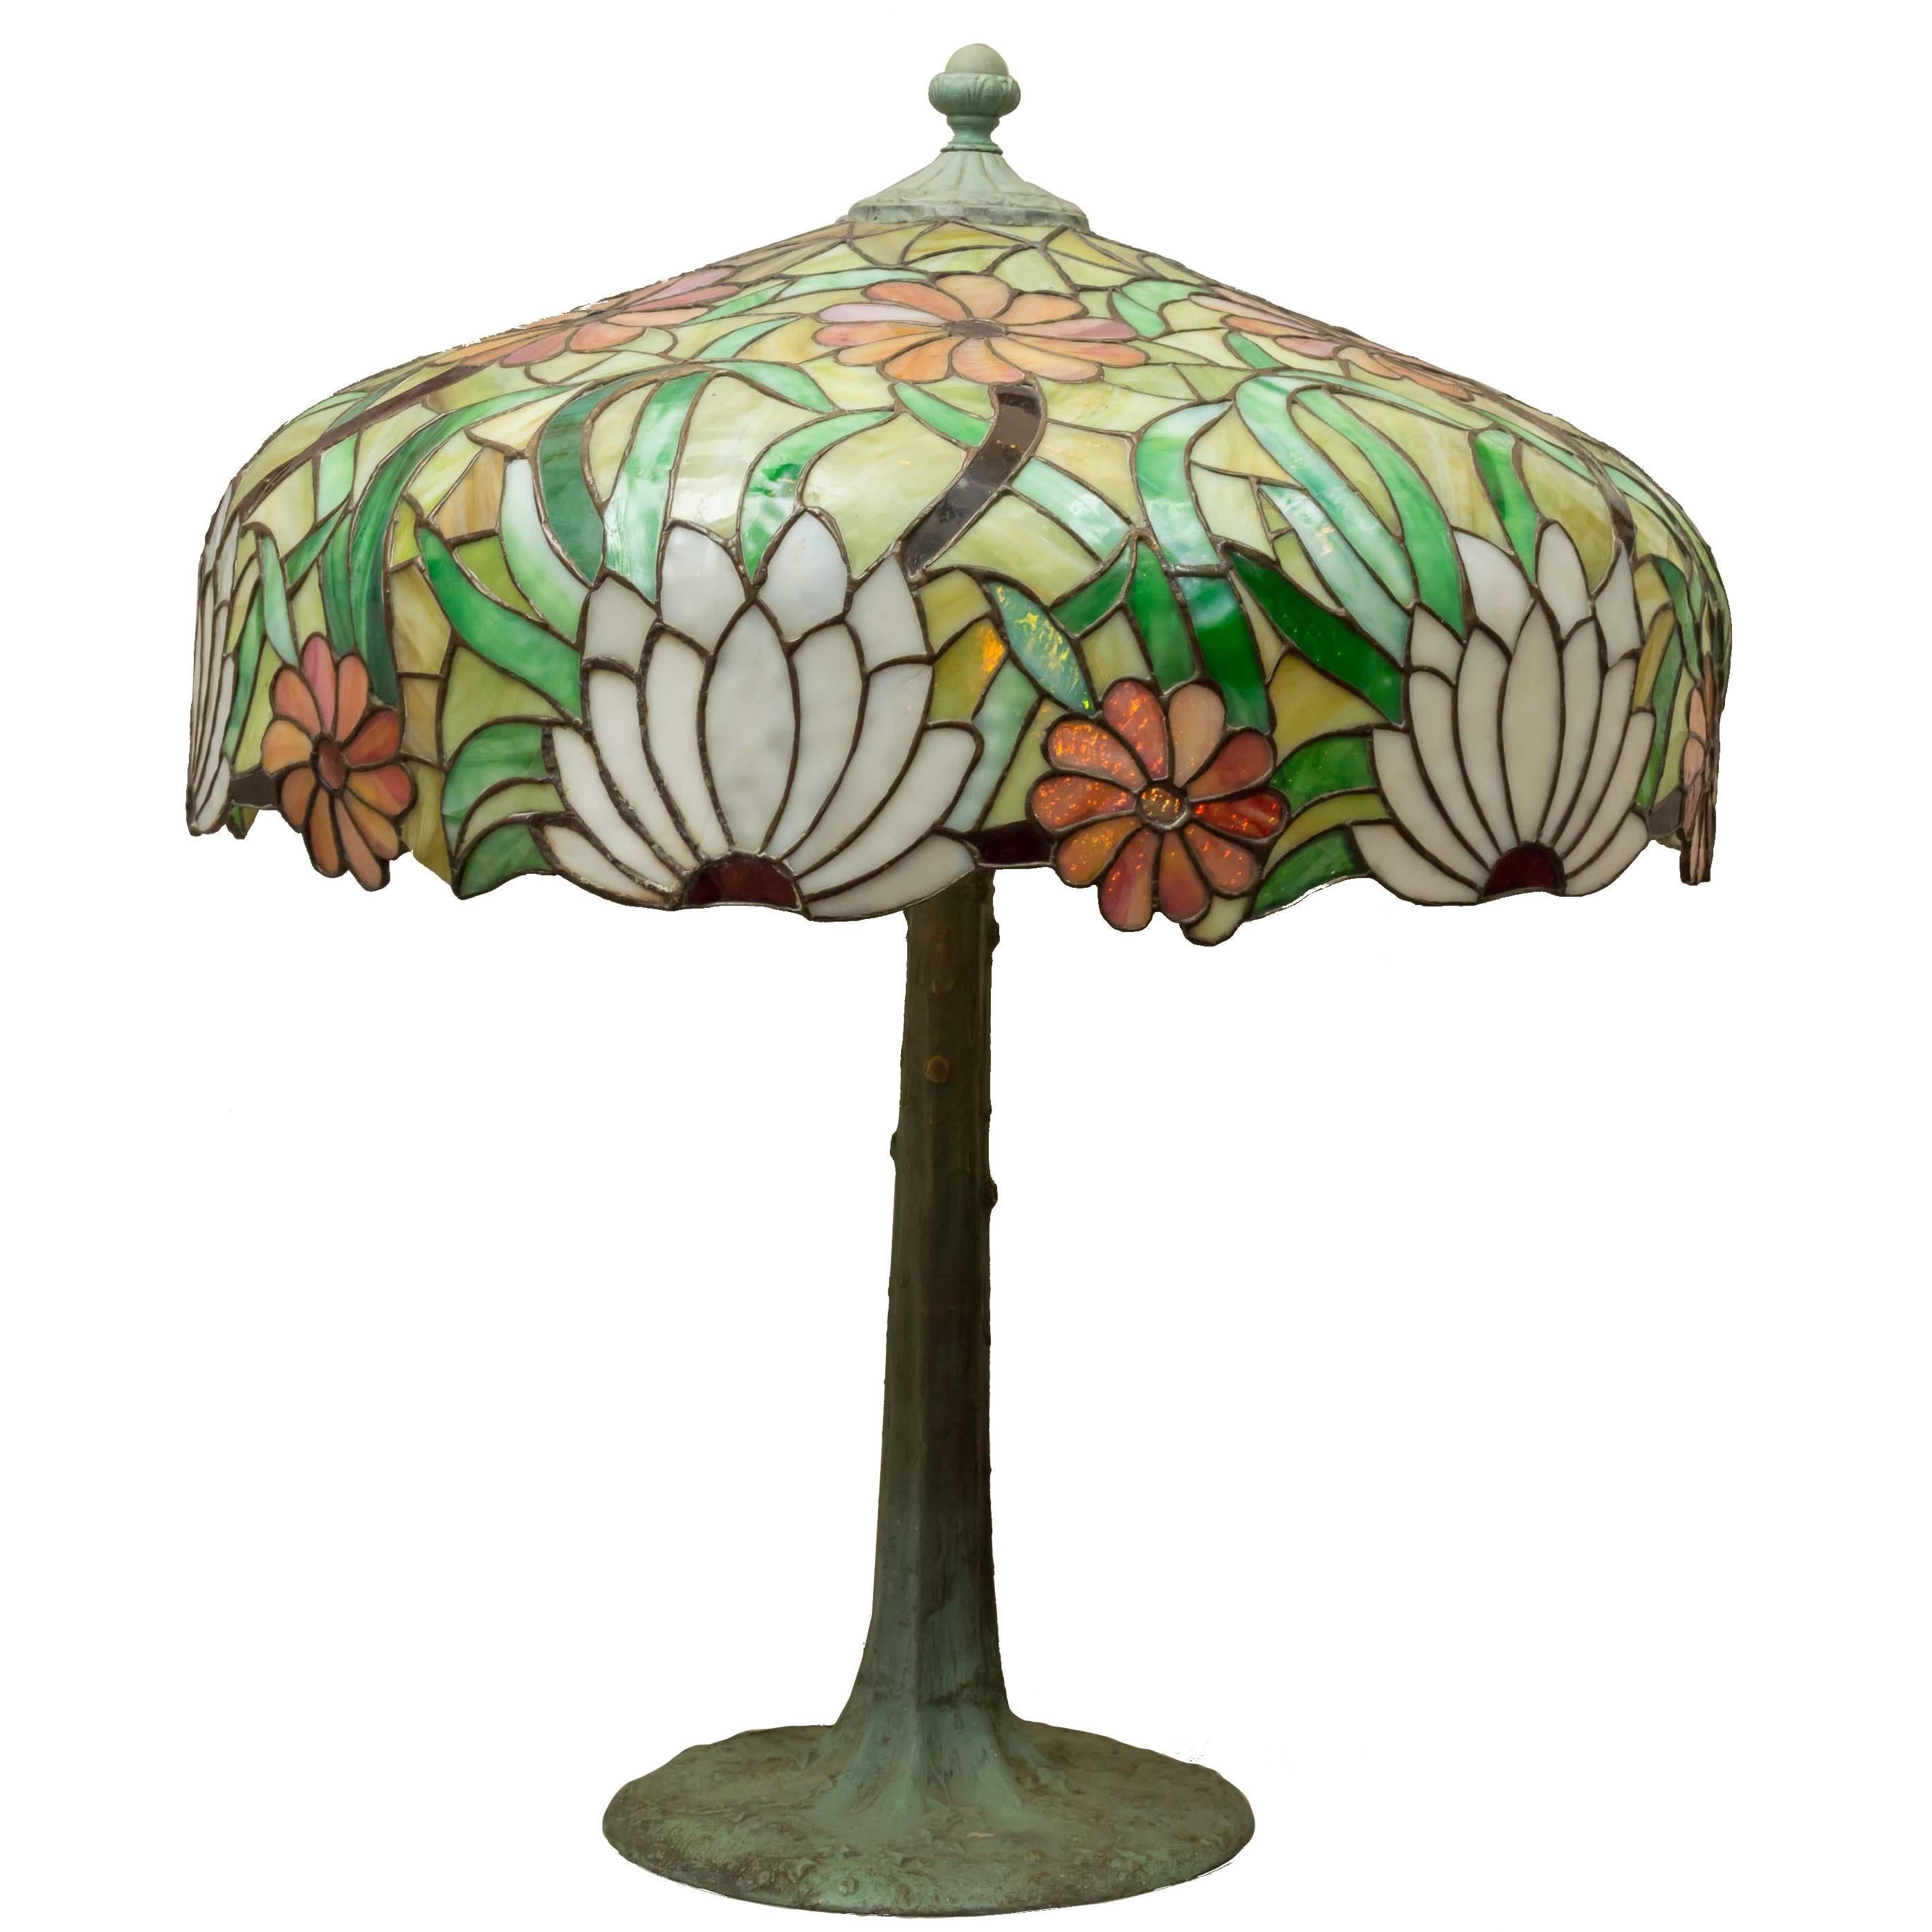 Large Leaded Glass Table Lamp, circa 1910 by the Miller Lamp Company